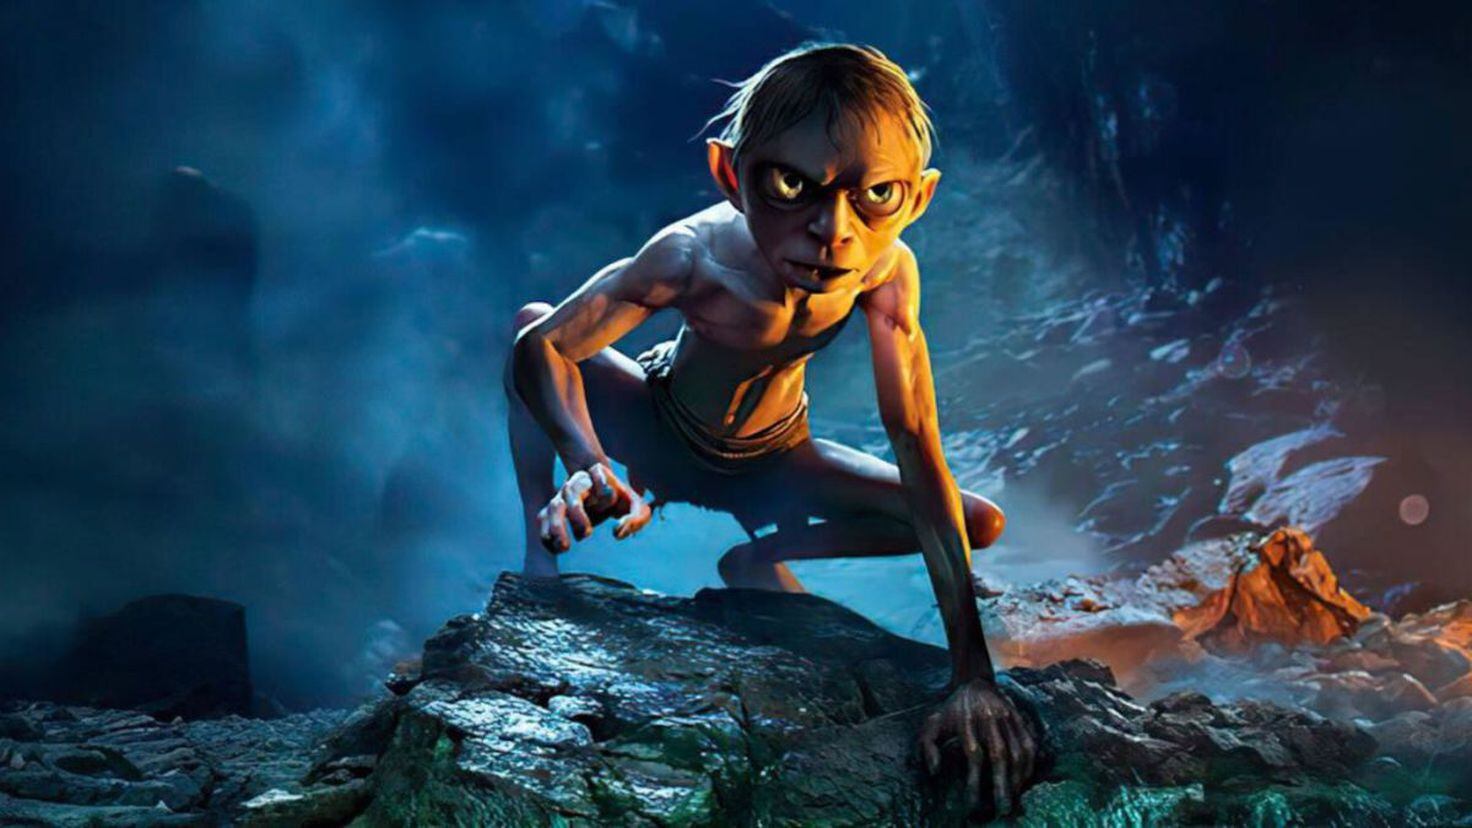 There's a 'Lord of the Rings' story game about Gollum coming in 2021